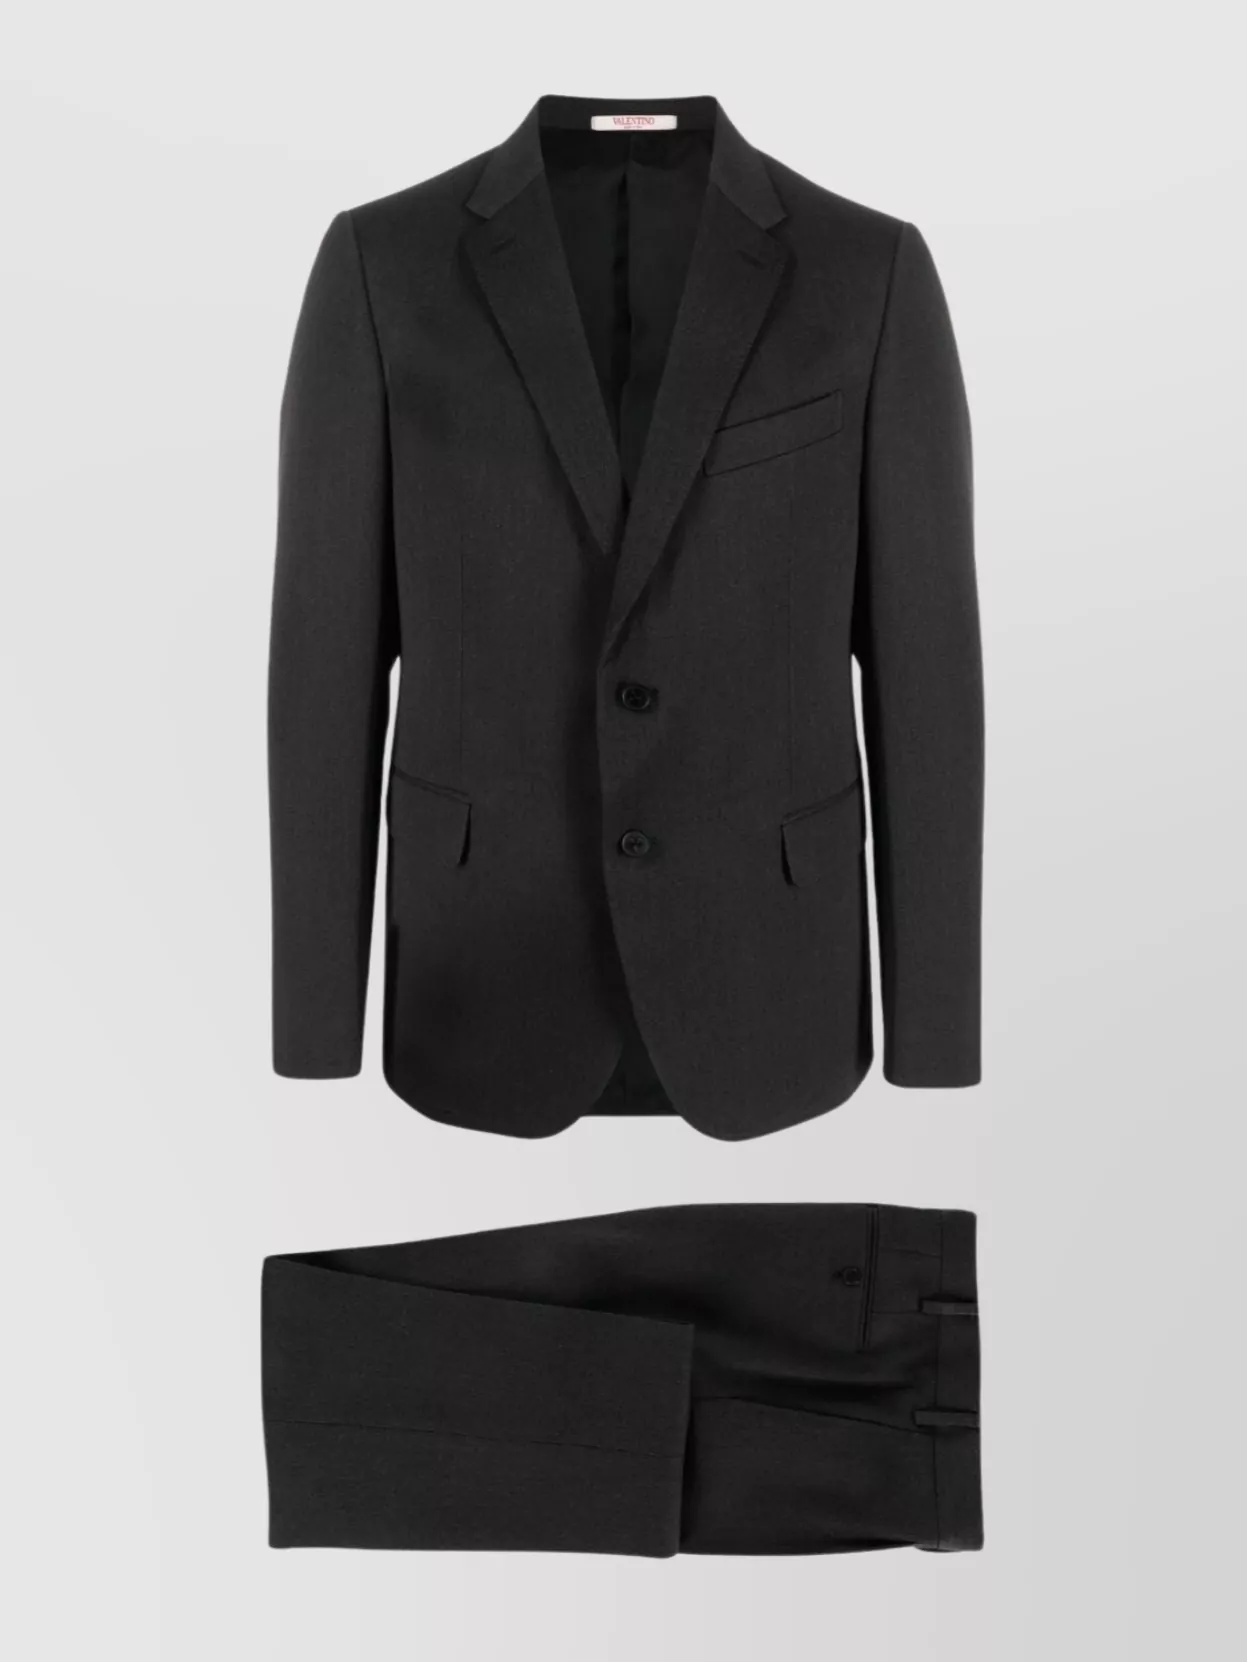 VALENTINO REAR VENTS TAILORED WOOL SUIT